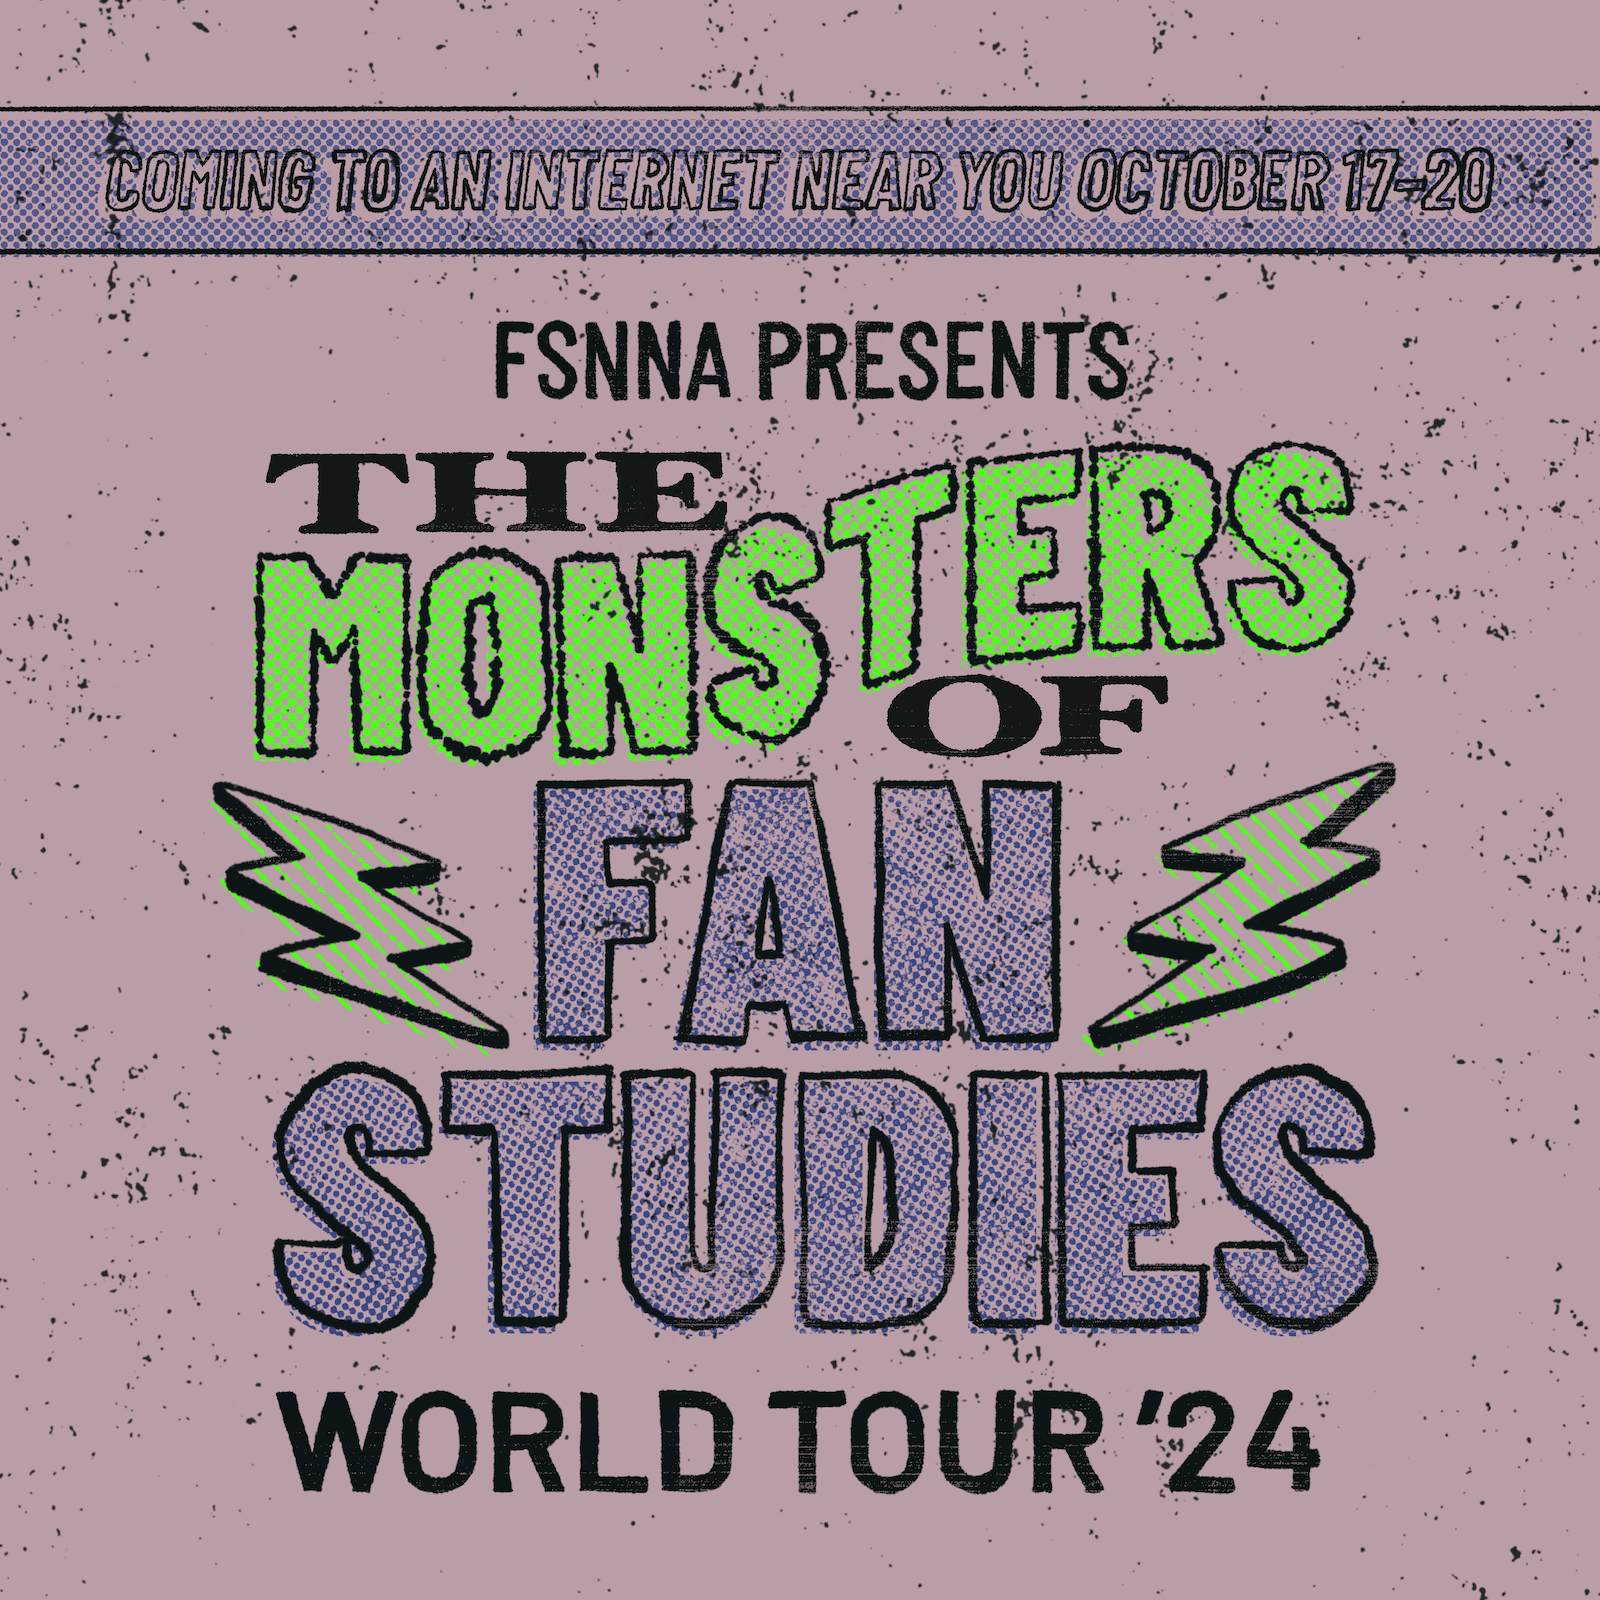 Conference teaser image styled on a hand-drawn and photocopies rock show gig poster. Text reads: "Coming to an Internet Near You October 17–20. FSNNA Presents The Monsters of Fan Studies World Tour ’24"